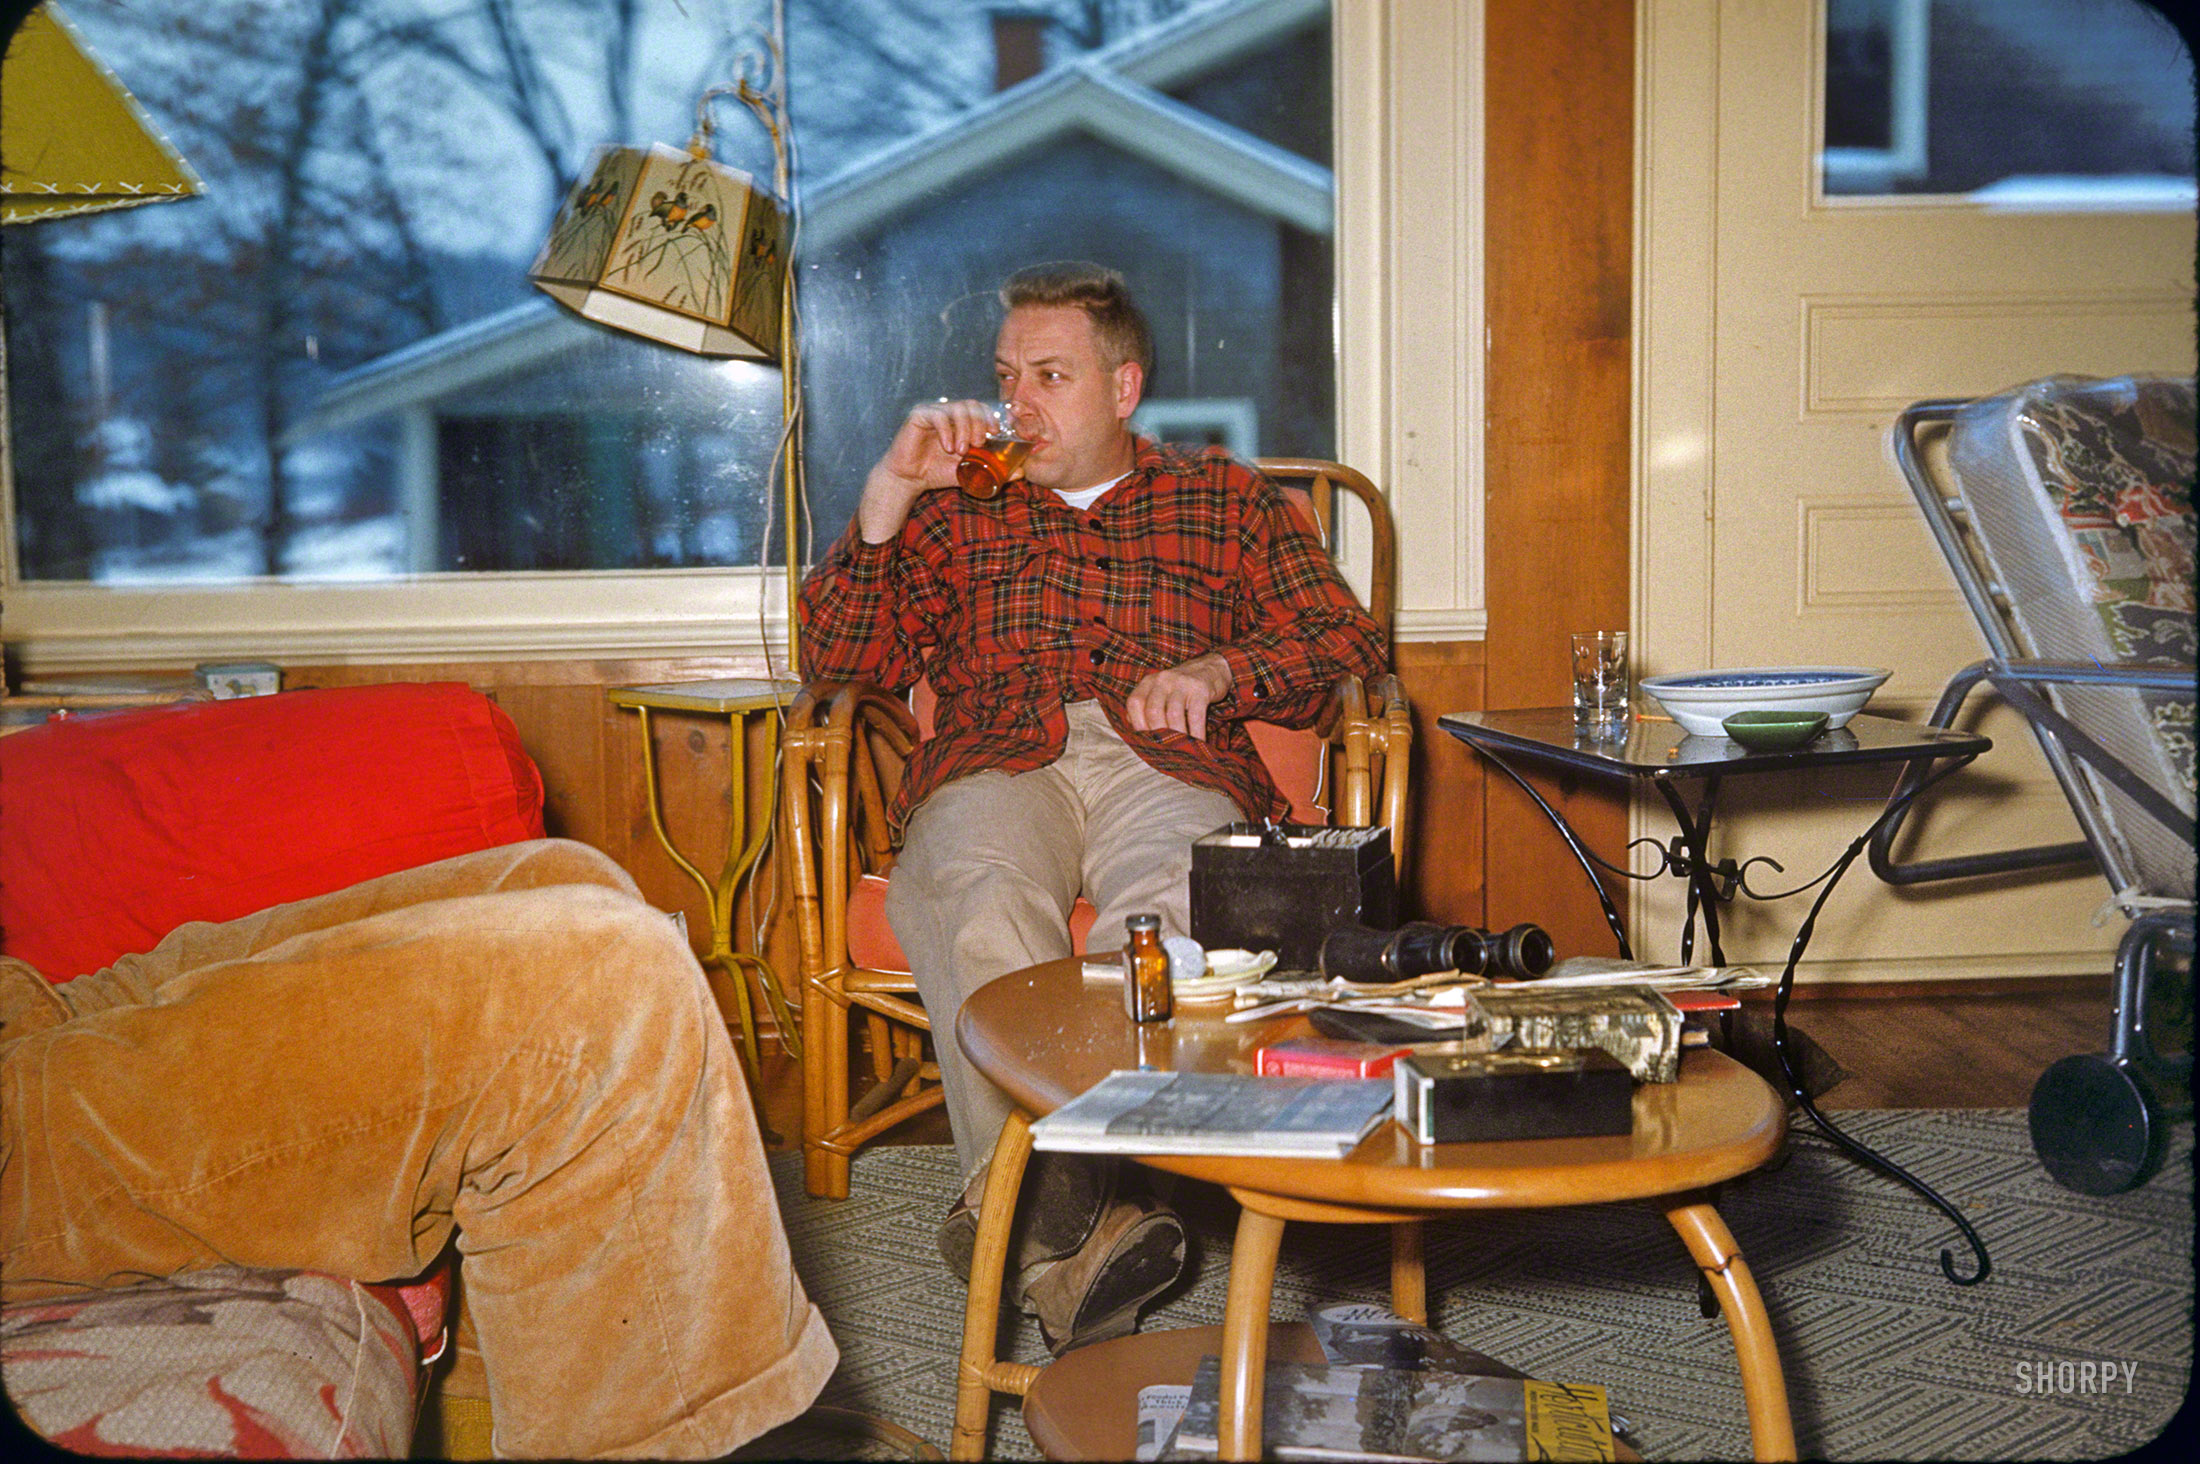 Somewhere in New England, sometime in mid-century. Another unlabeled slide from the Linda Kodachromes. Are there any clues here as to the year? Let's have a beer while we ponder. (UPDATE: See Comments for the answer.) View full size.